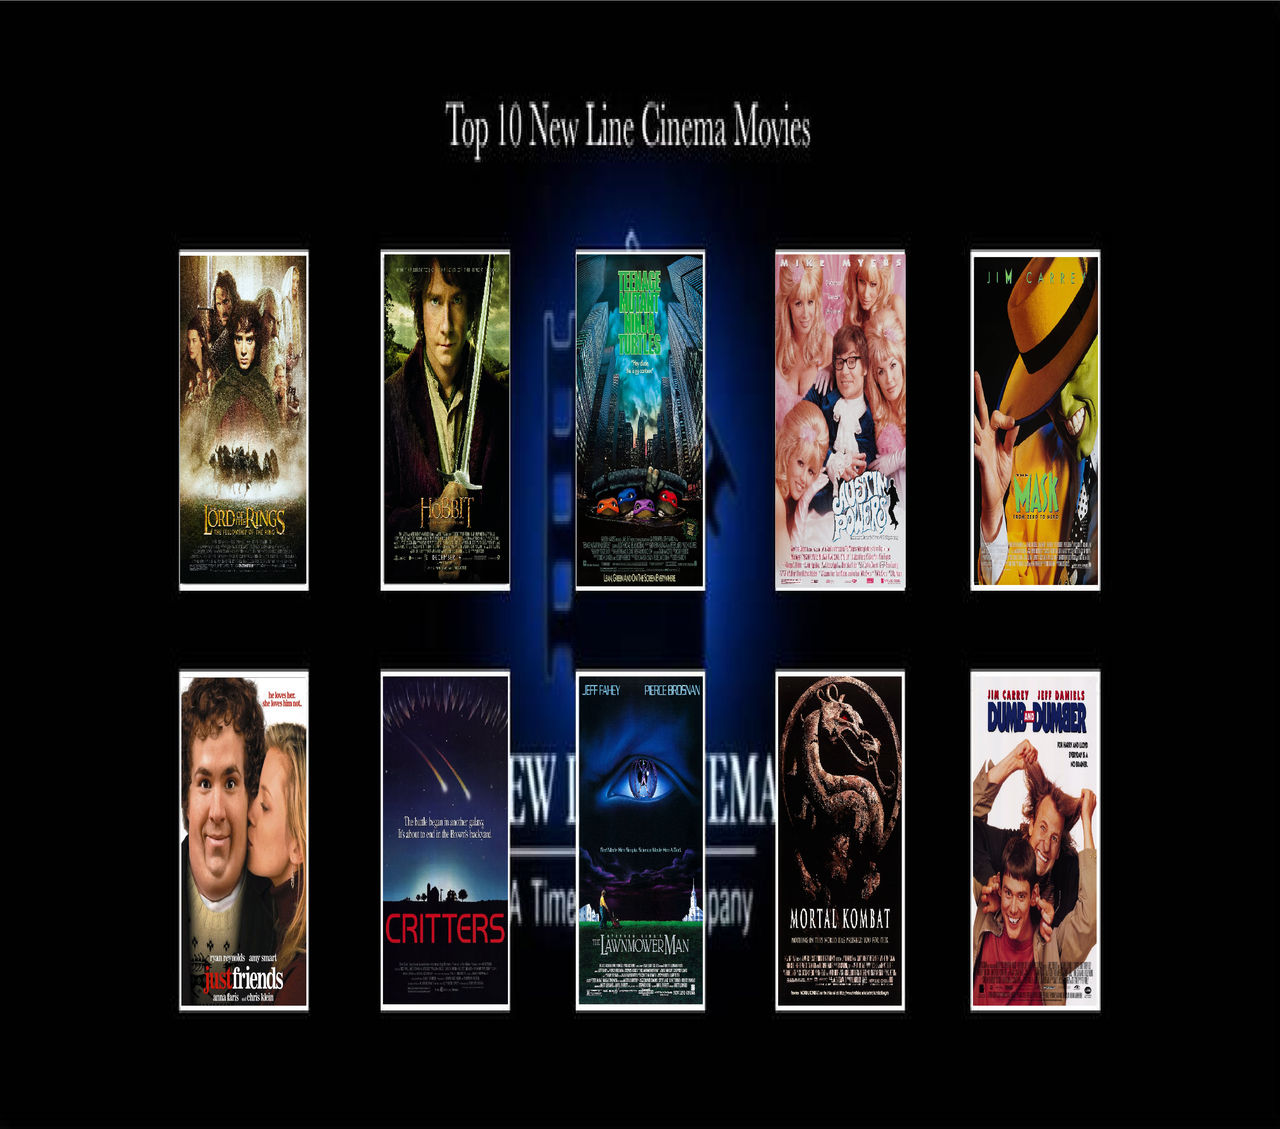 Top 10 New Line Cinema Movies by Perro2017 on DeviantArt